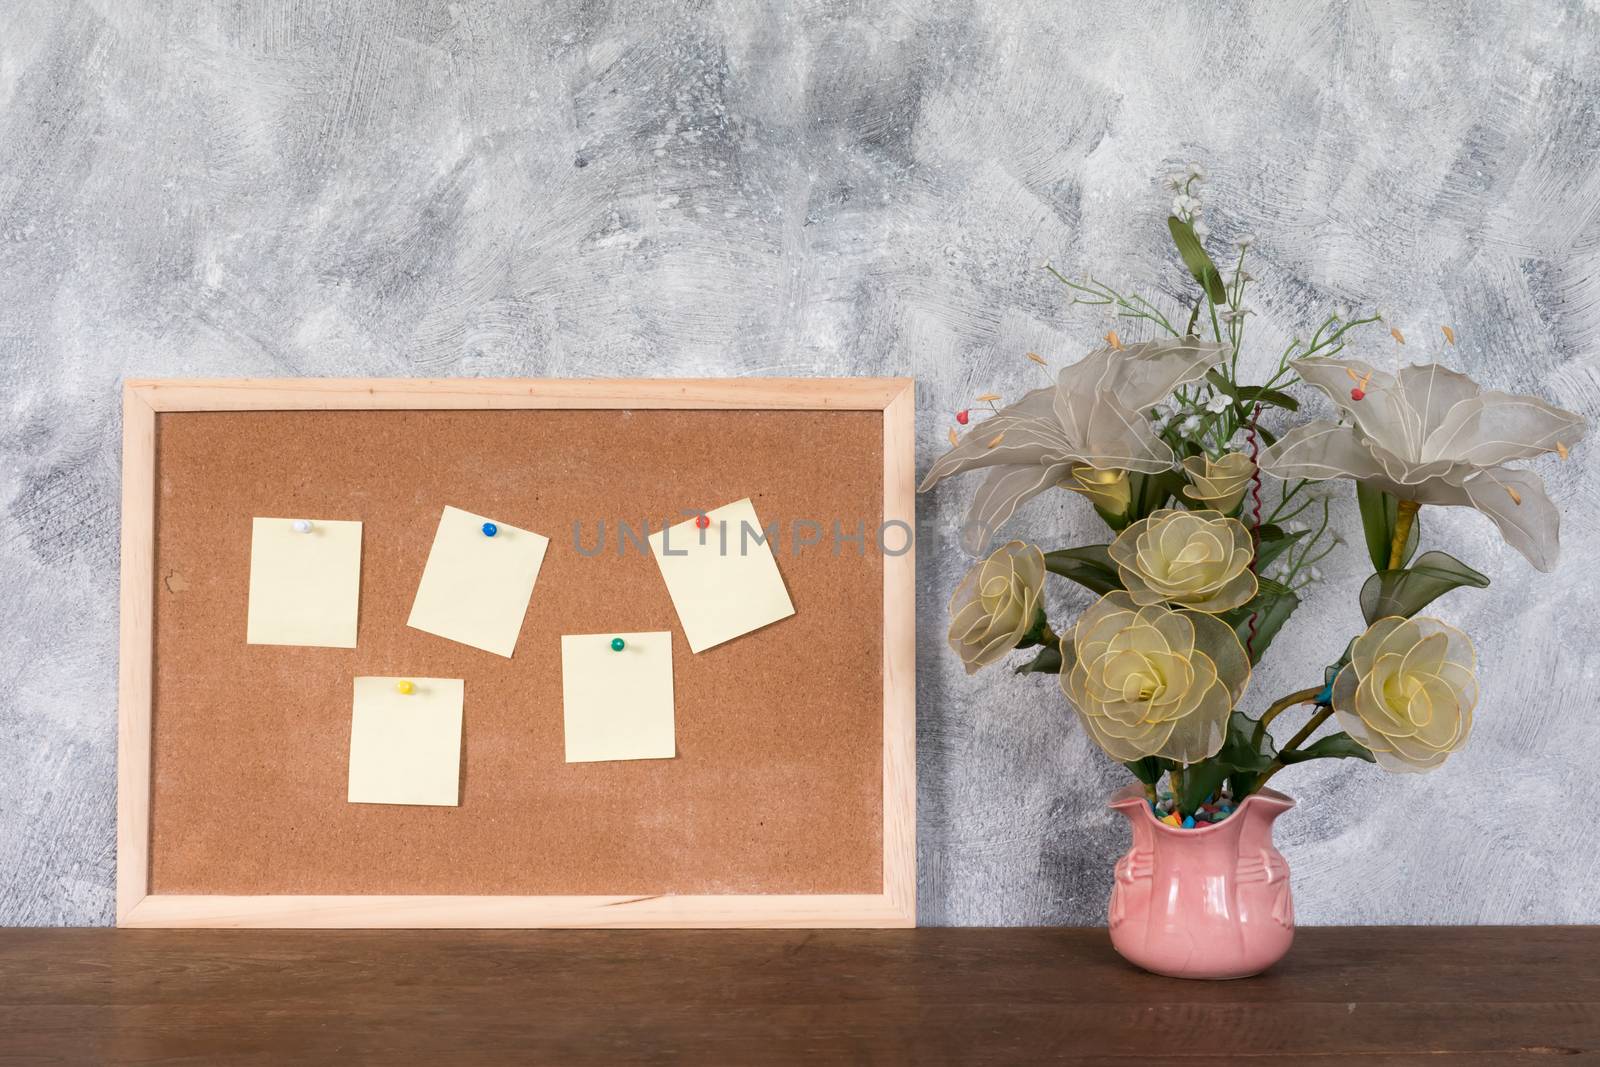 Blank papers pin up on cork board and flower vase over wooden table with textured background.